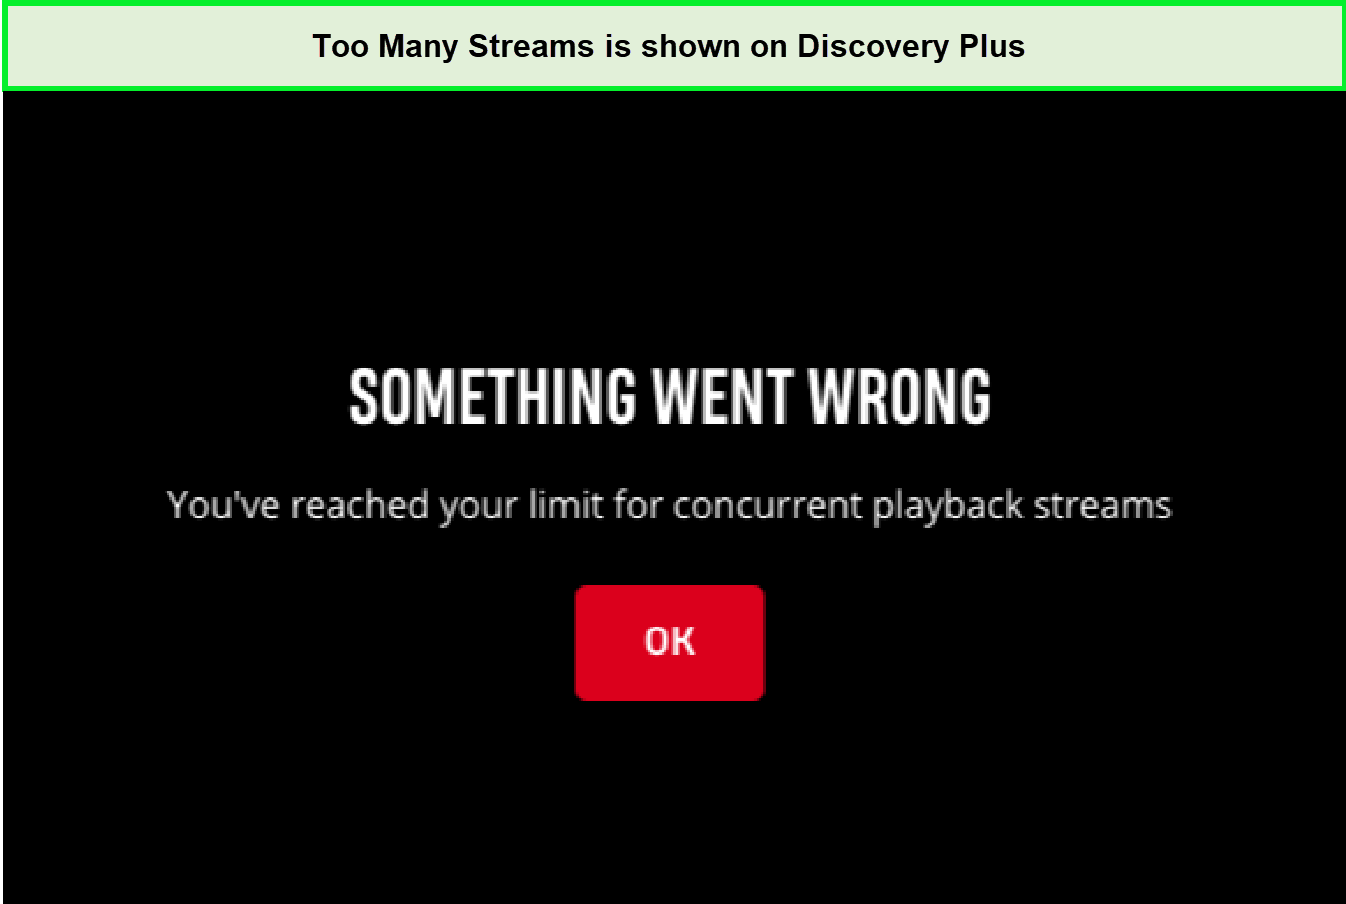 discovery-plus-too-many-streams-error-in-Netherlands